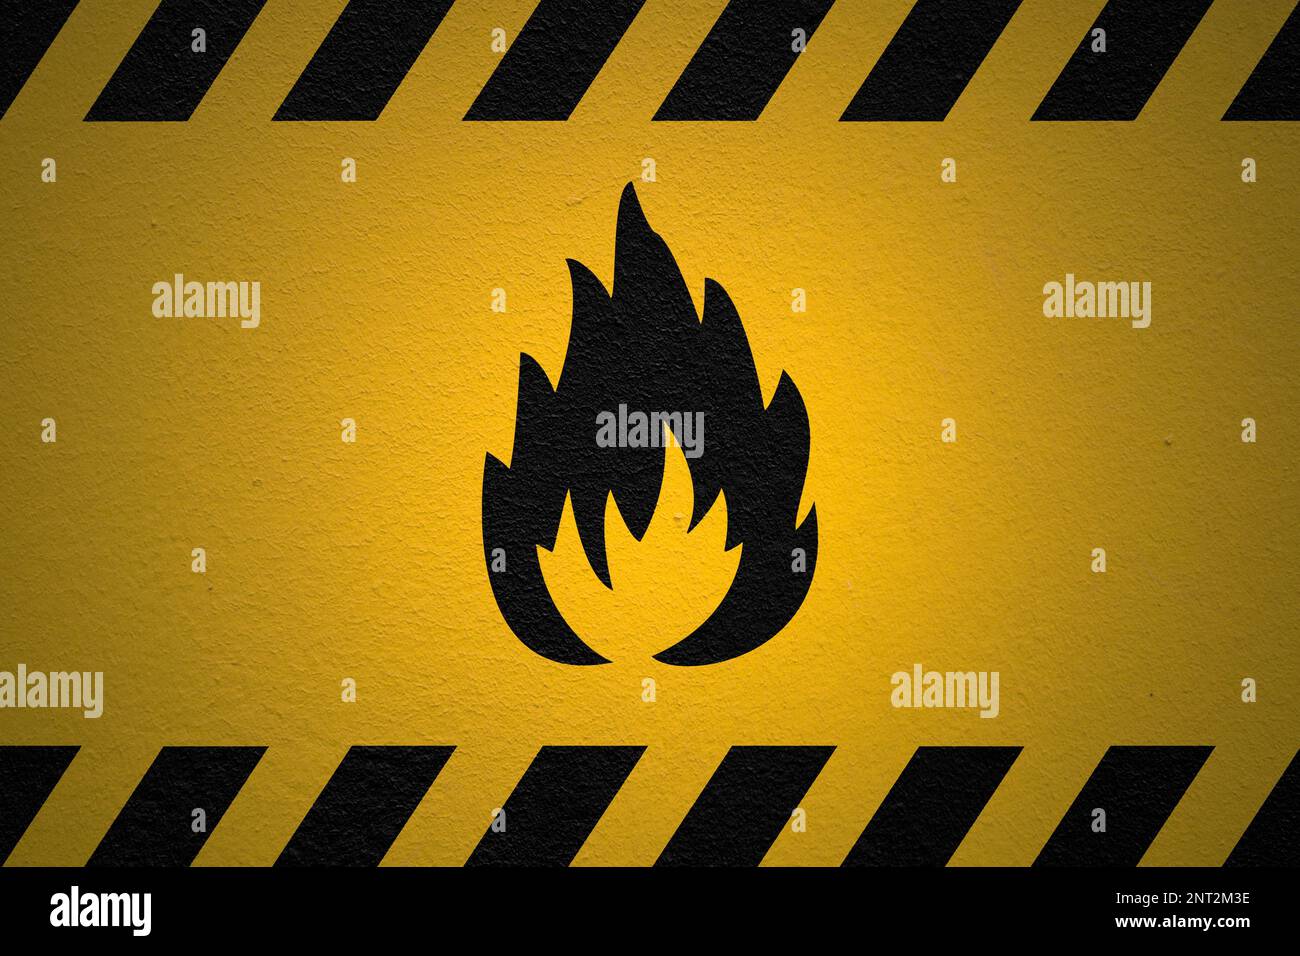 Black striped yellow background with a Danger Flammable Sign and a light effect to dramatize the whole. Stock Photo